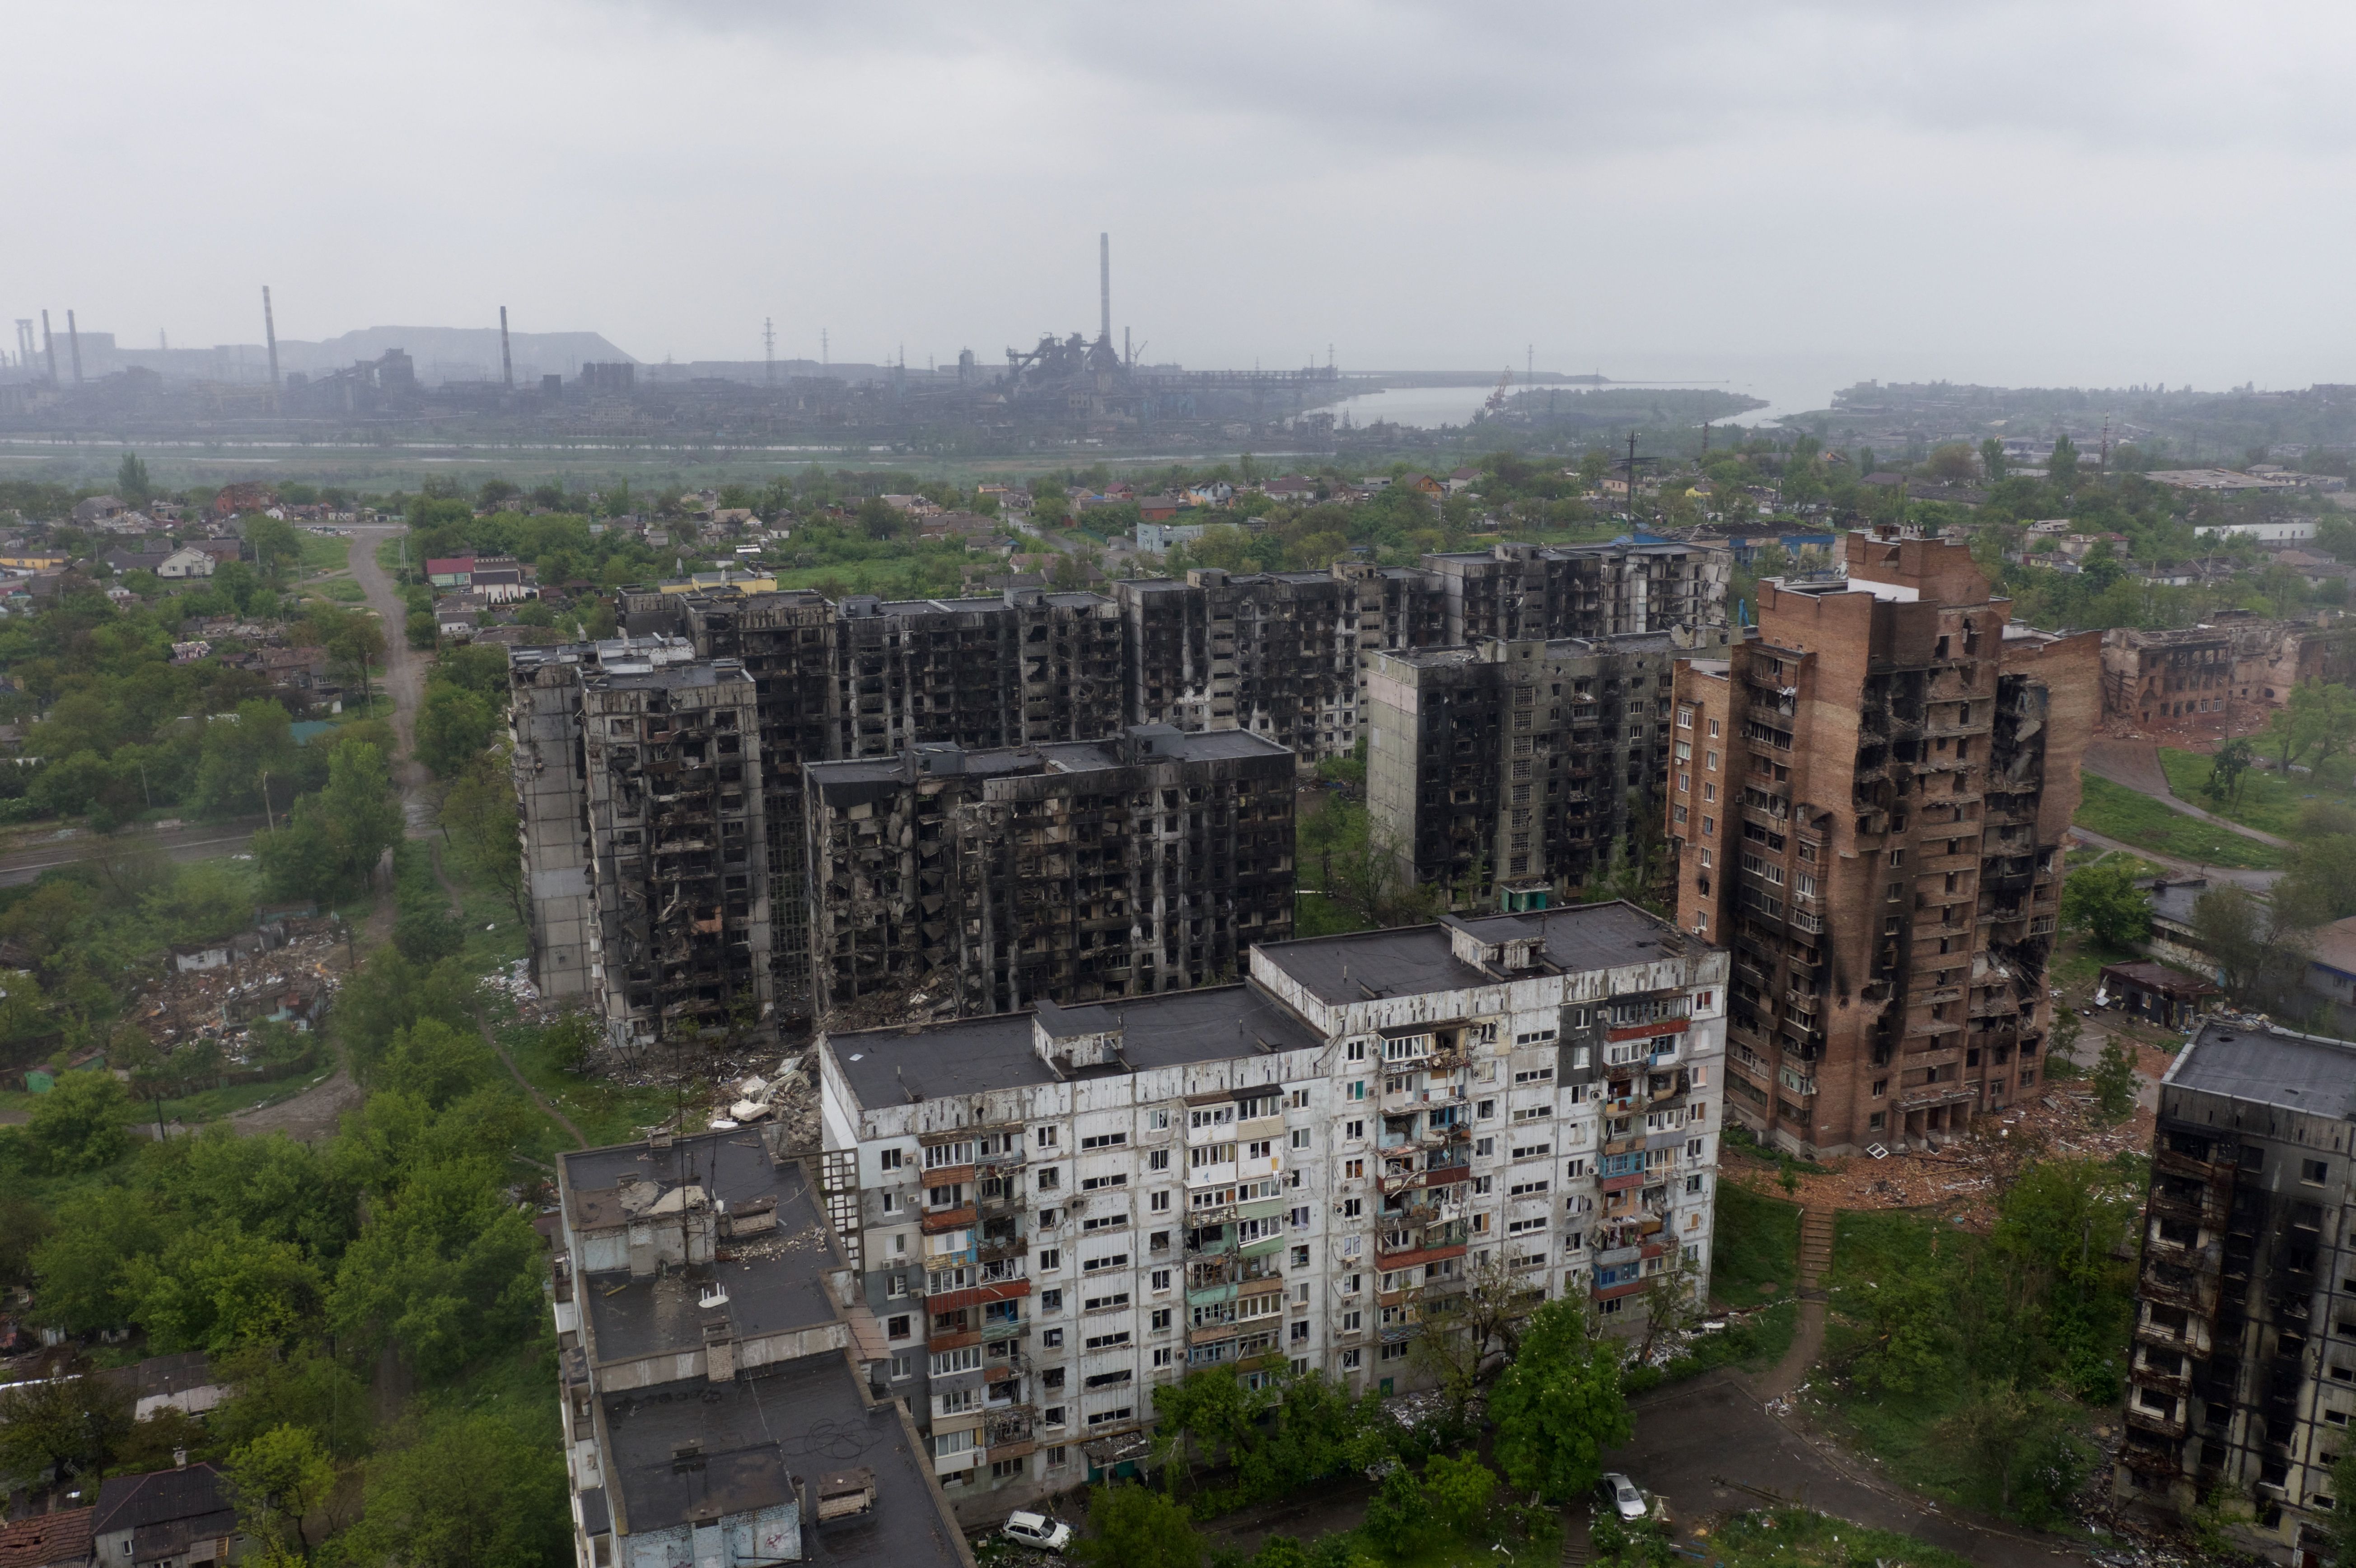 An aerial view of damaged residential buildings and the Azovstal steel plant in the background in the port city of Mariupol, on Wednesday, May 18.